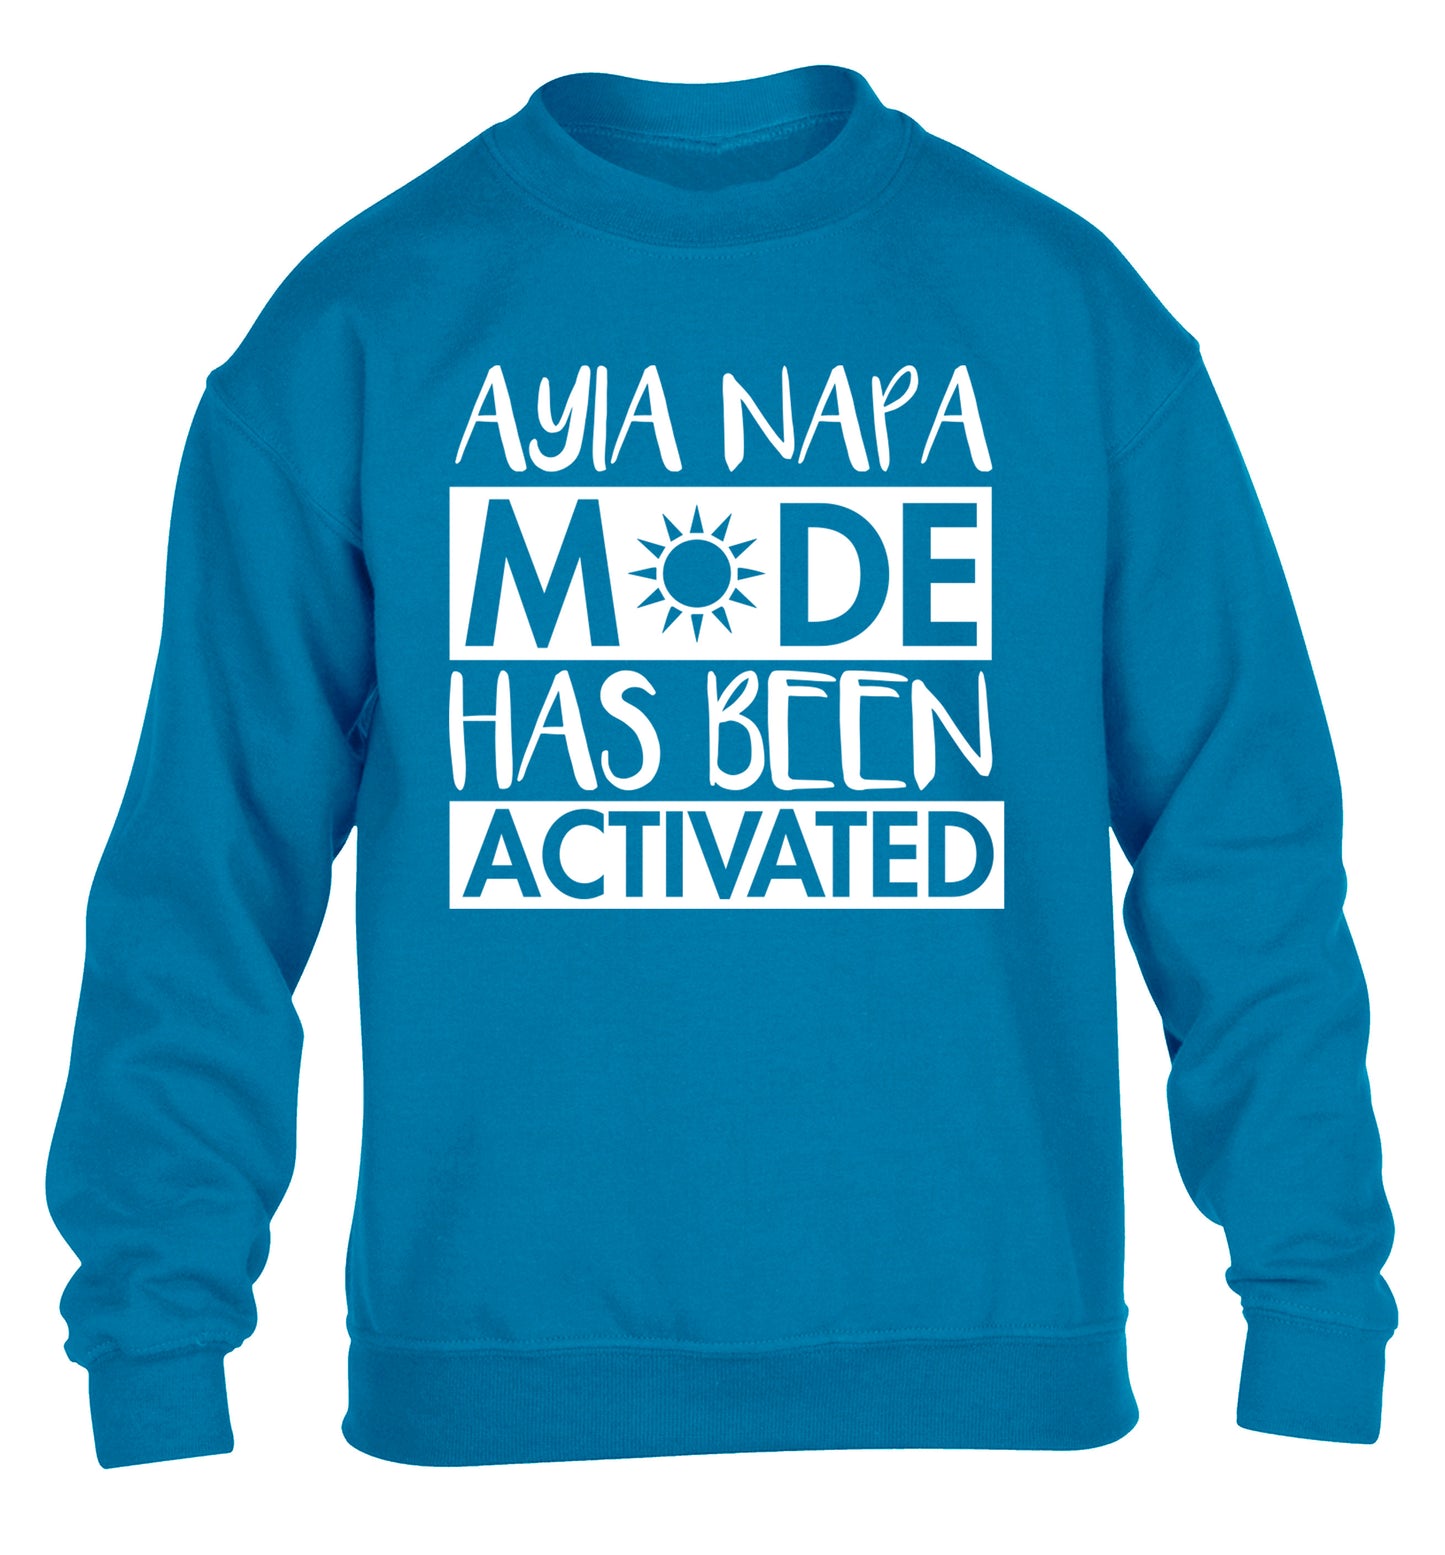 Ayia Napa mode has been activated children's blue sweater 12-13 Years